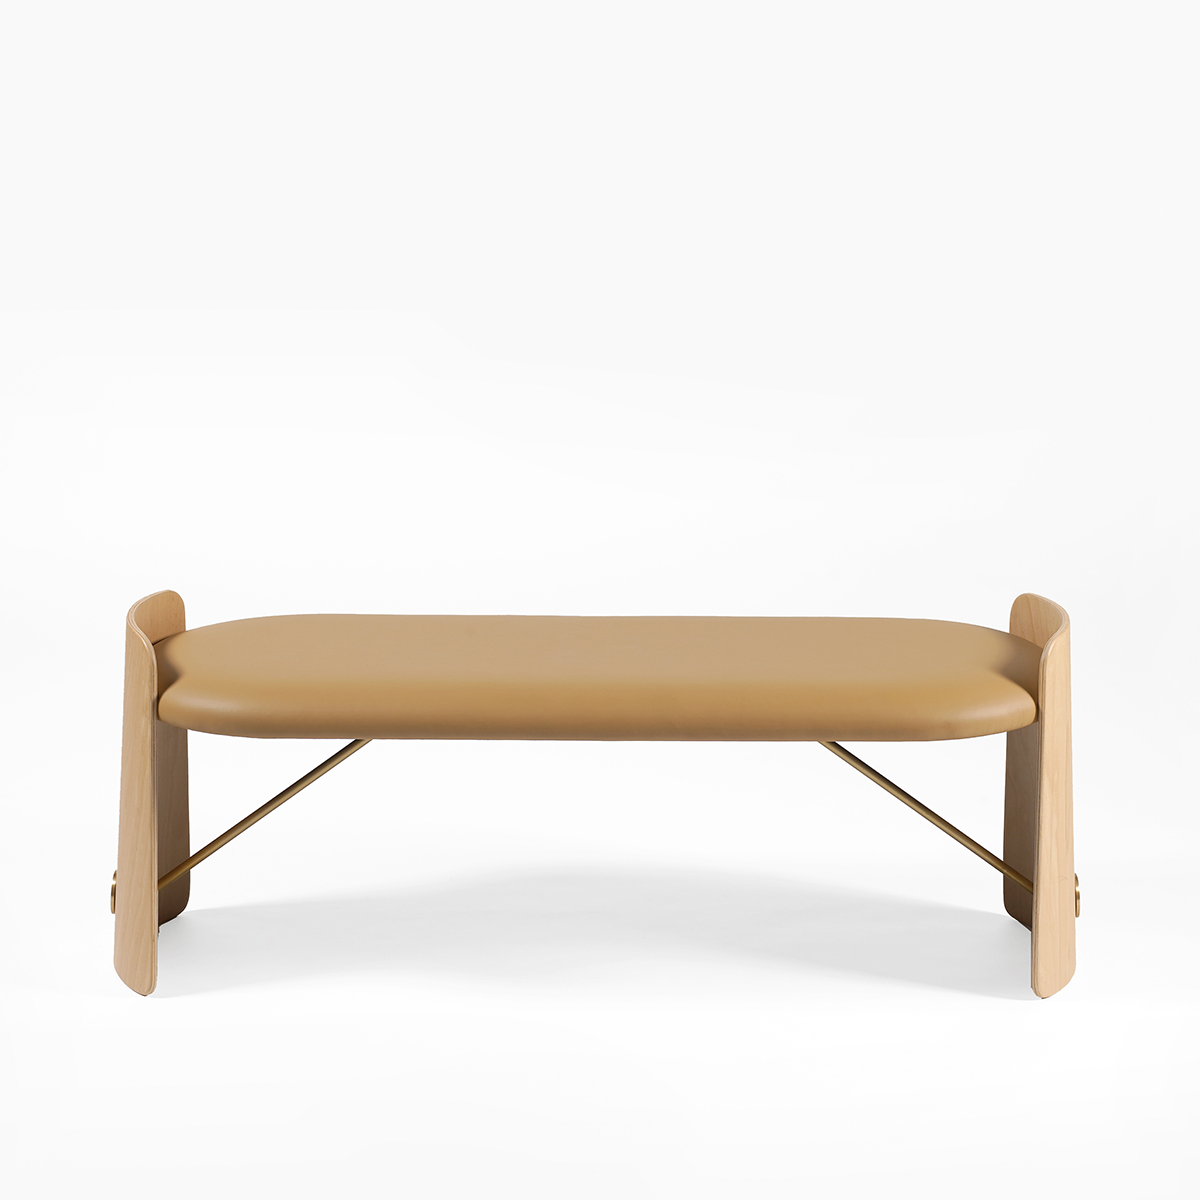 Biscotto bench in natural by Christophe de la Fontaine DANTE - Goods and Bads